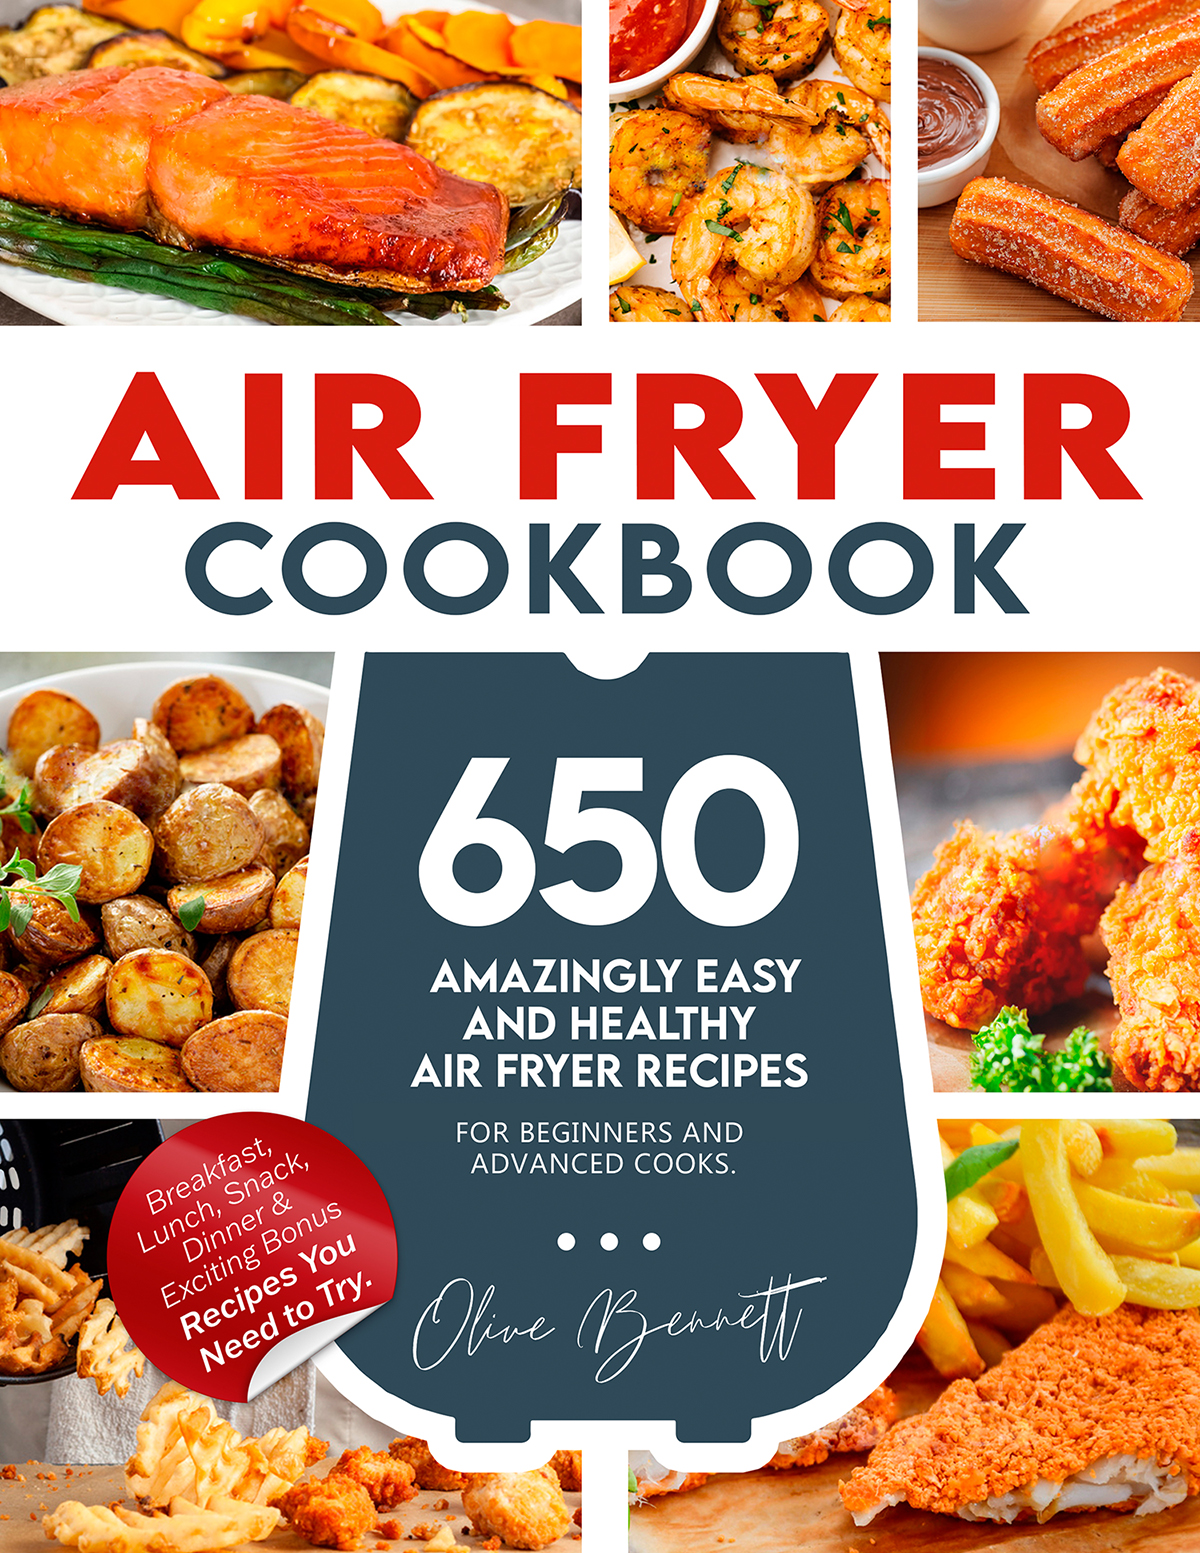 FREE: Air Fryer Cookbook: 650 Amazingly Easy and Healthy Air Fryer Recipes for Beginners and Advanced Cooks. Breakfast, Lunch, Snack, Dinner & Exciting Bonus Recipes You Need to Try. by Olive Bennett